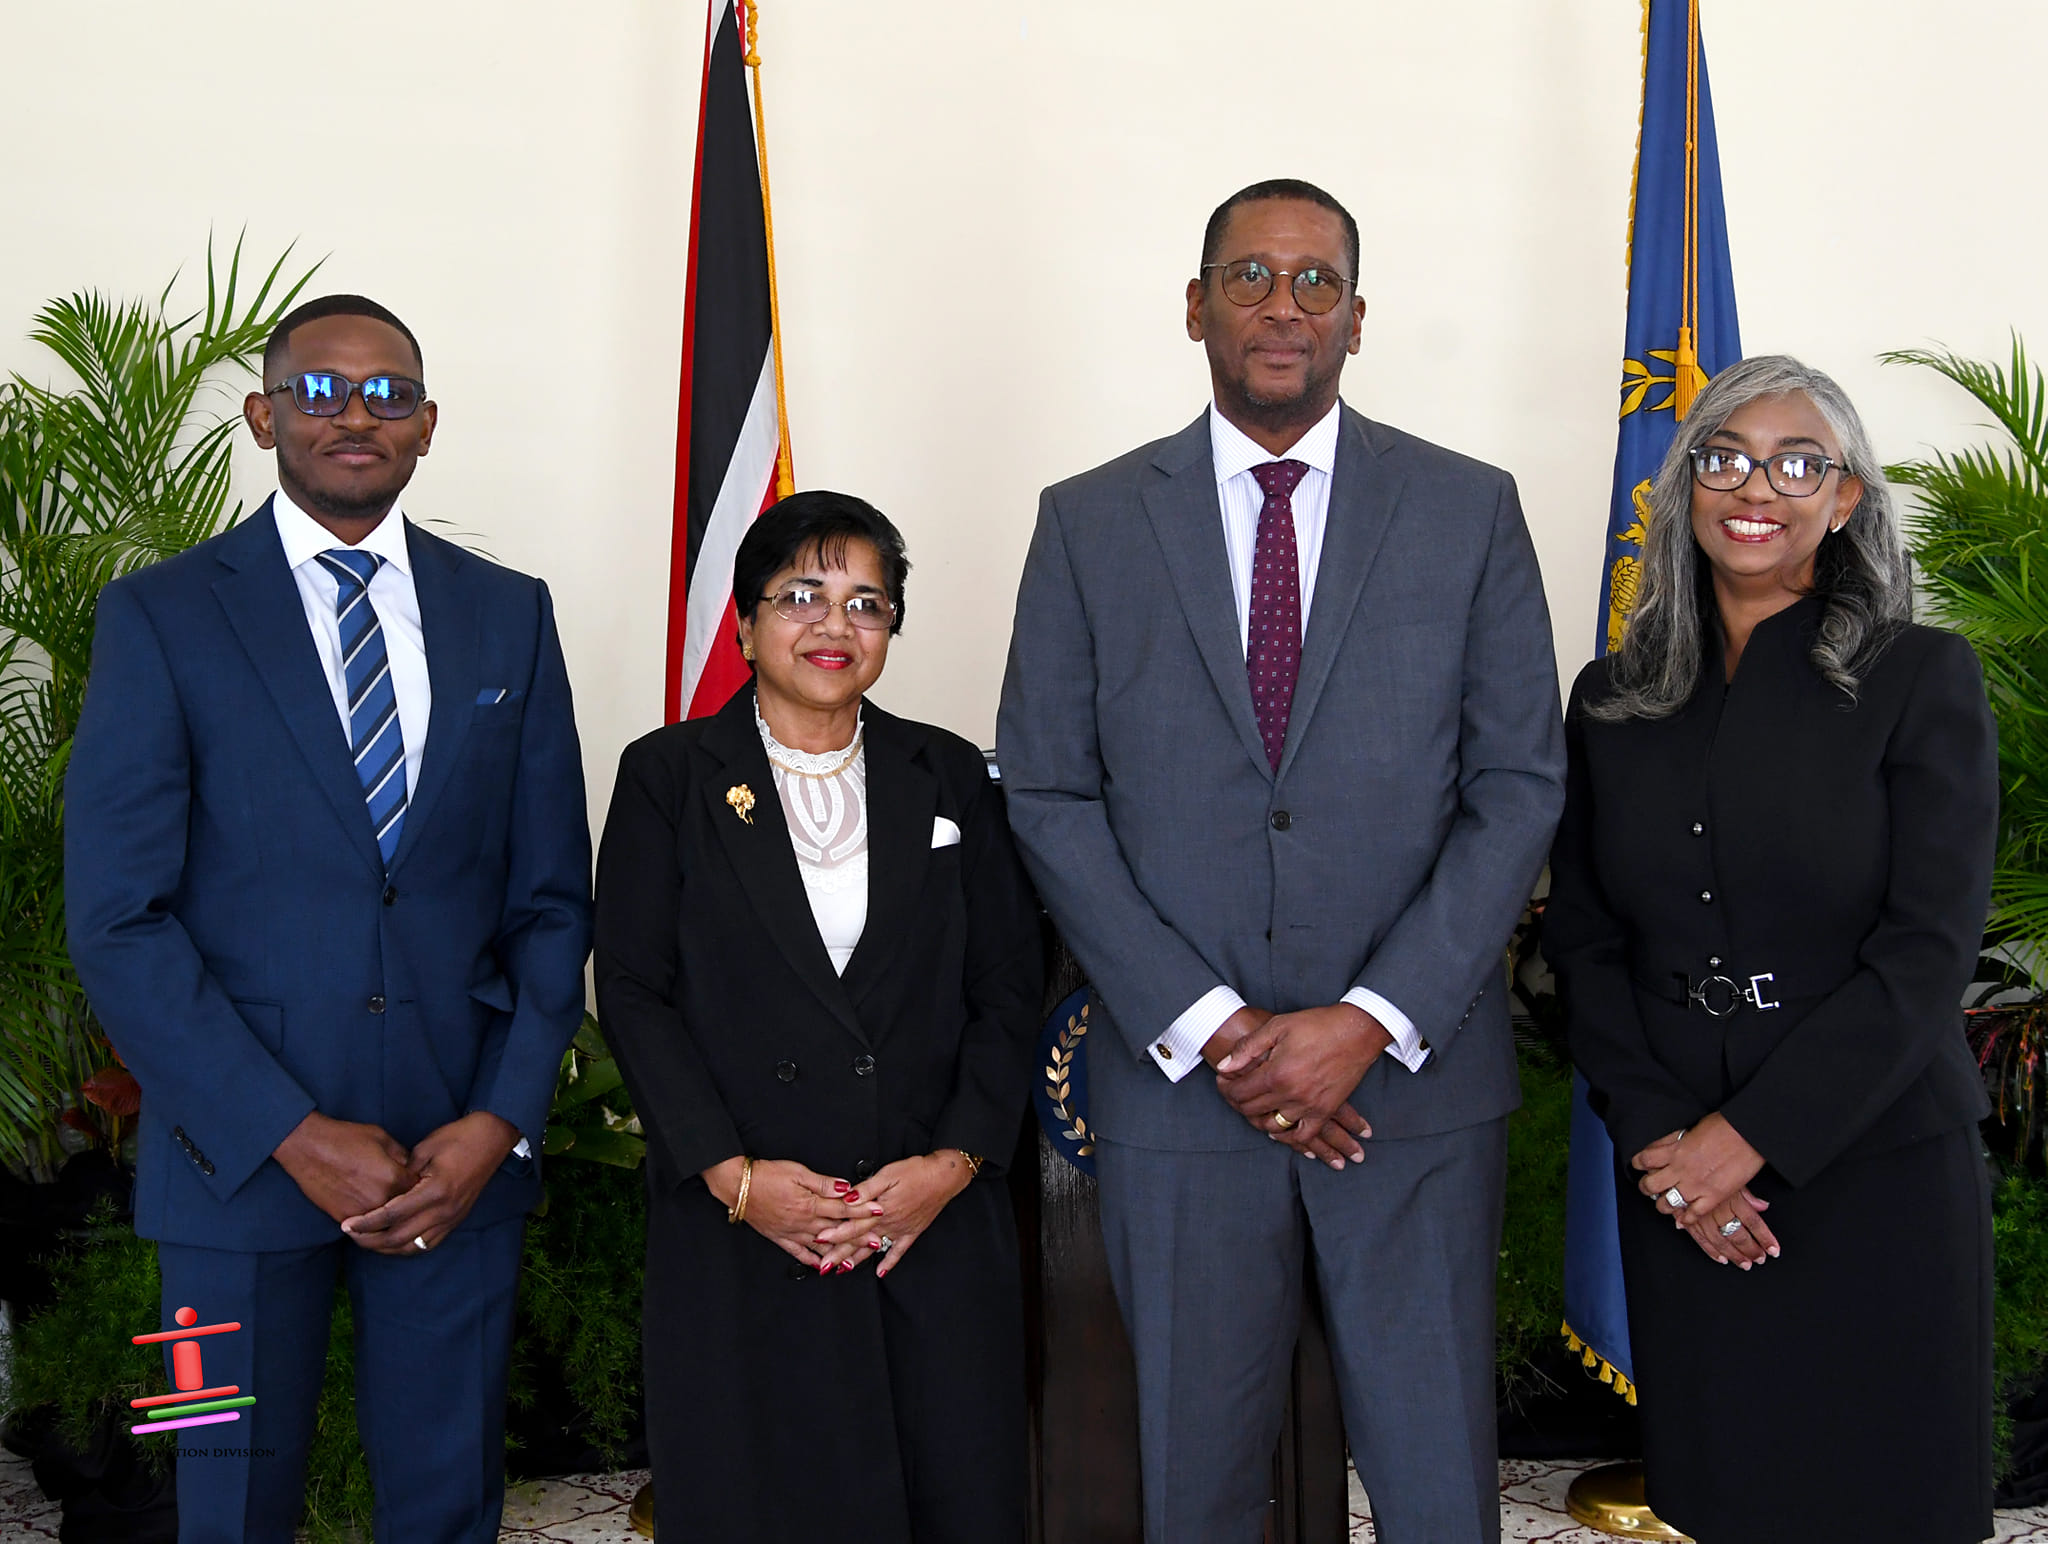 Busby Earle-Caddle, Jones and Cedeno sworn in as Puisne Judges of the Supreme Court